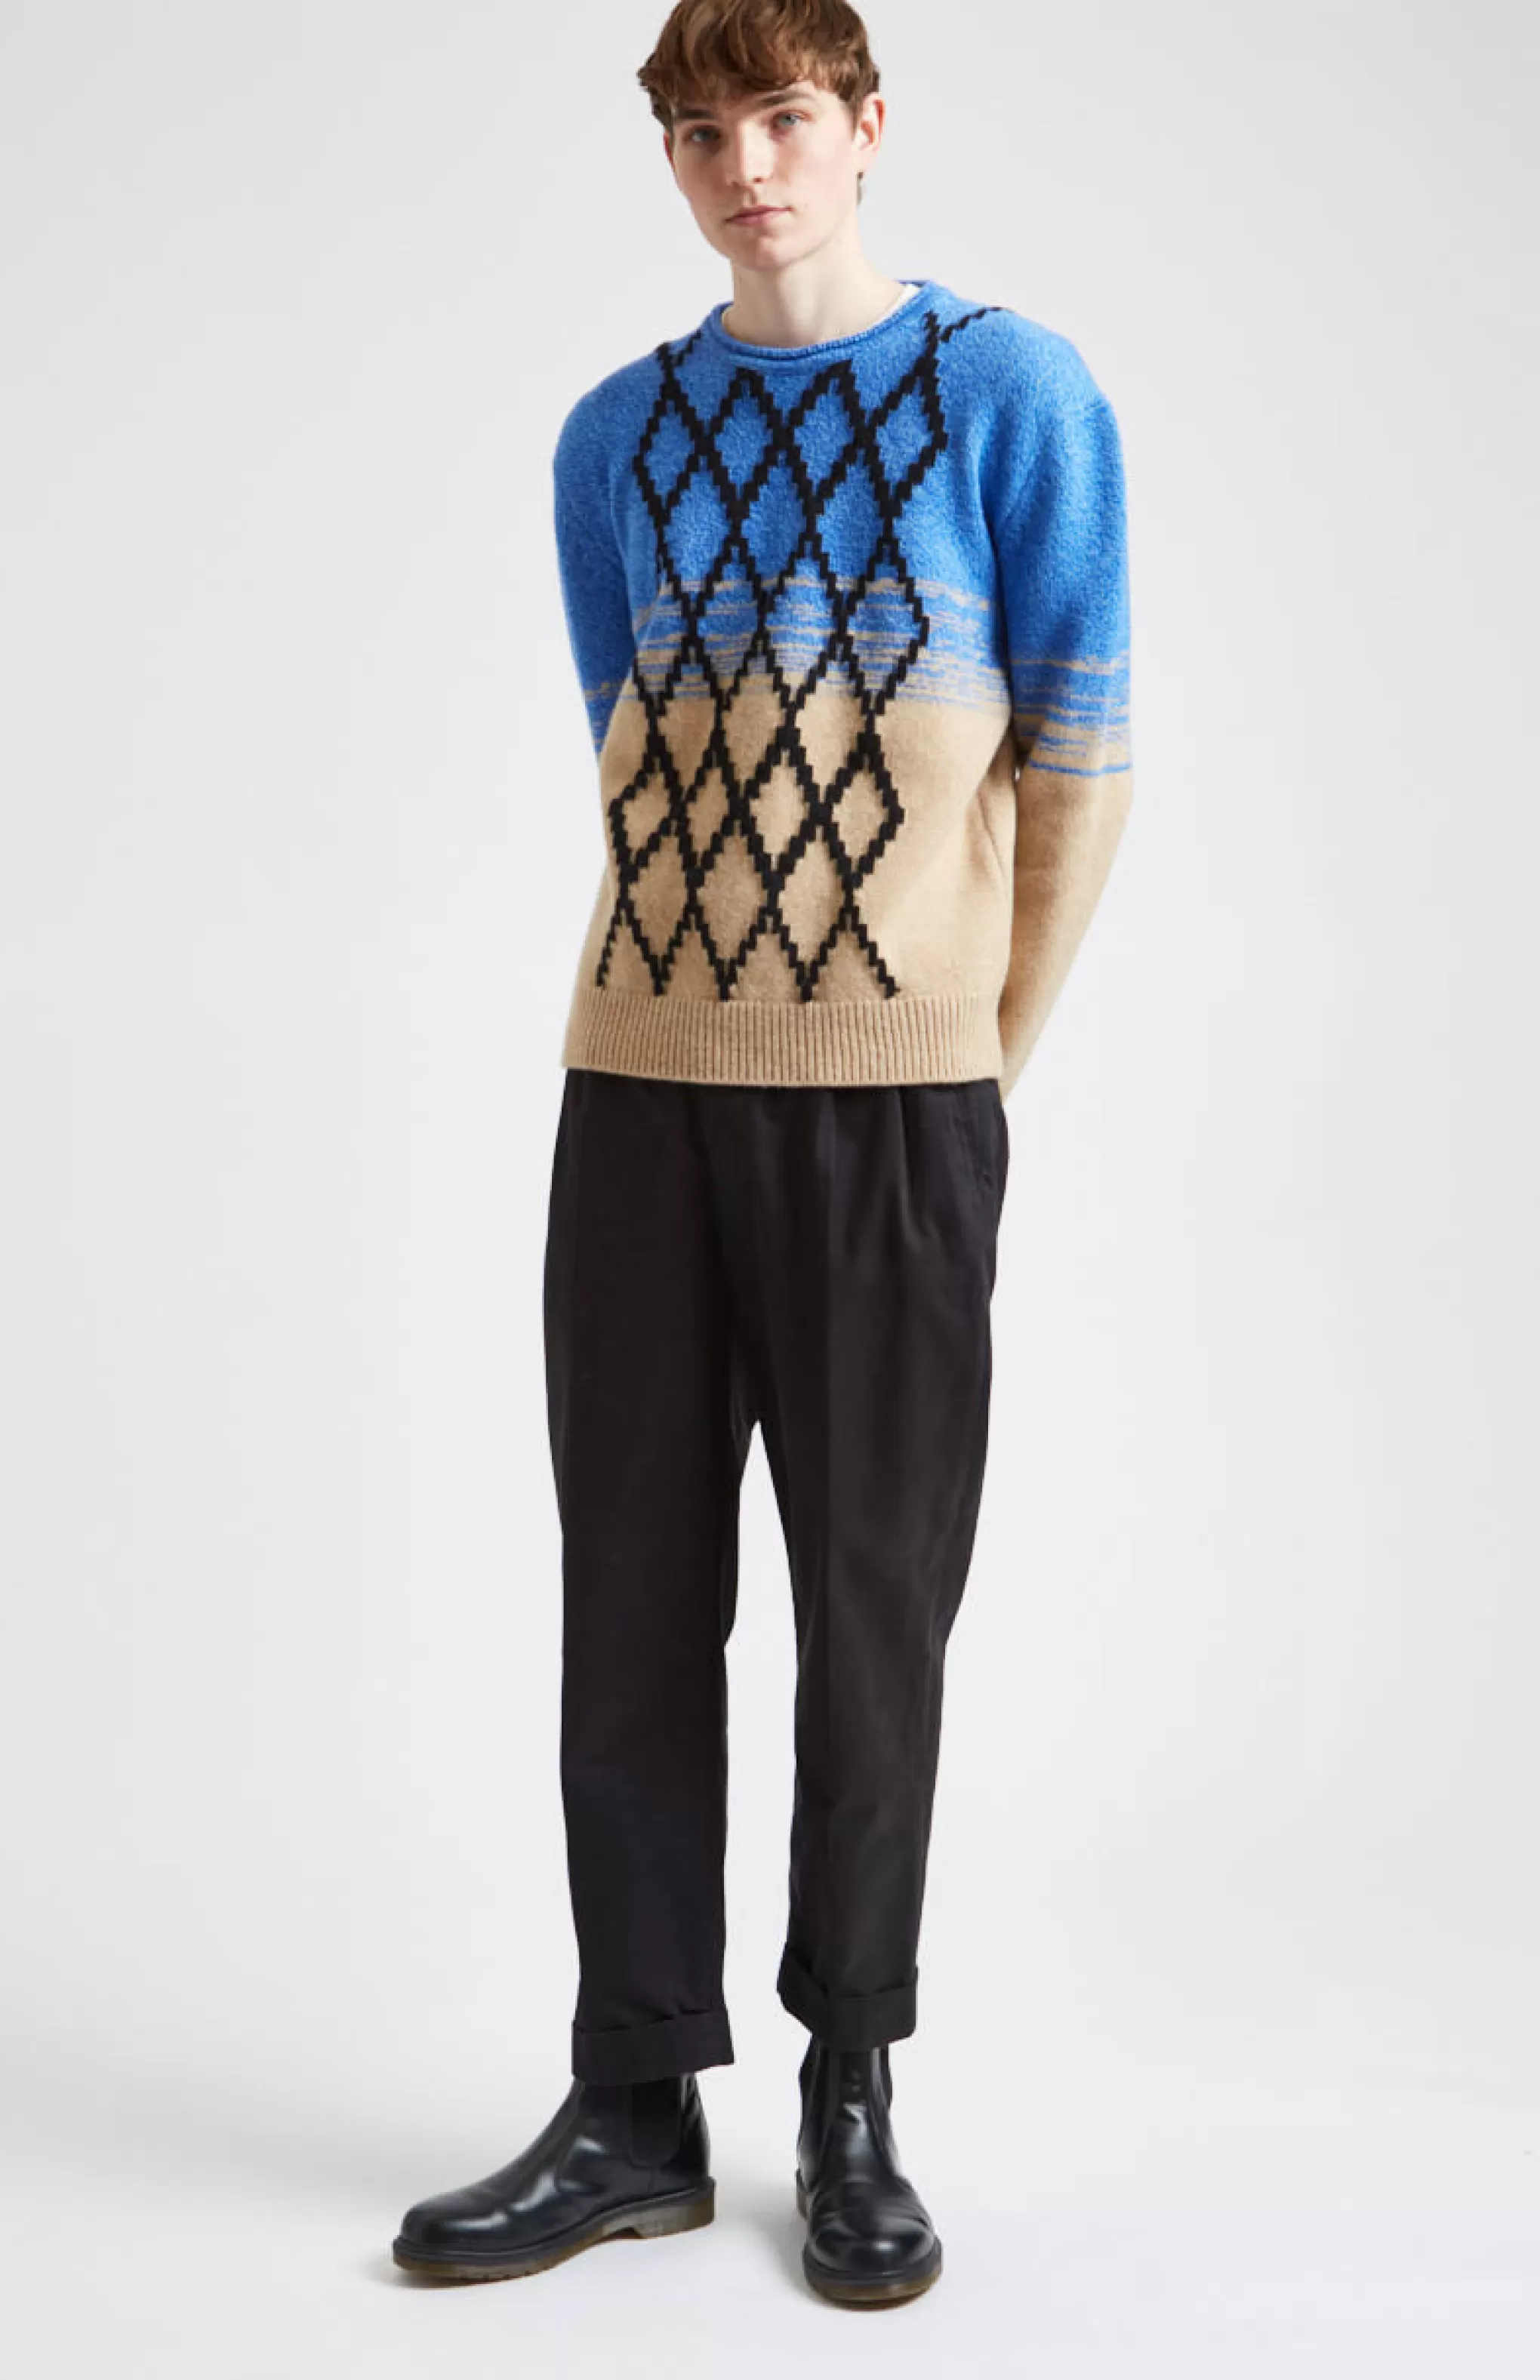 Online Lambswool Round Neck Jumper With Argyle Pattern And Degrade Effect In Cobalt And Camel Men Heavy Weight Knits